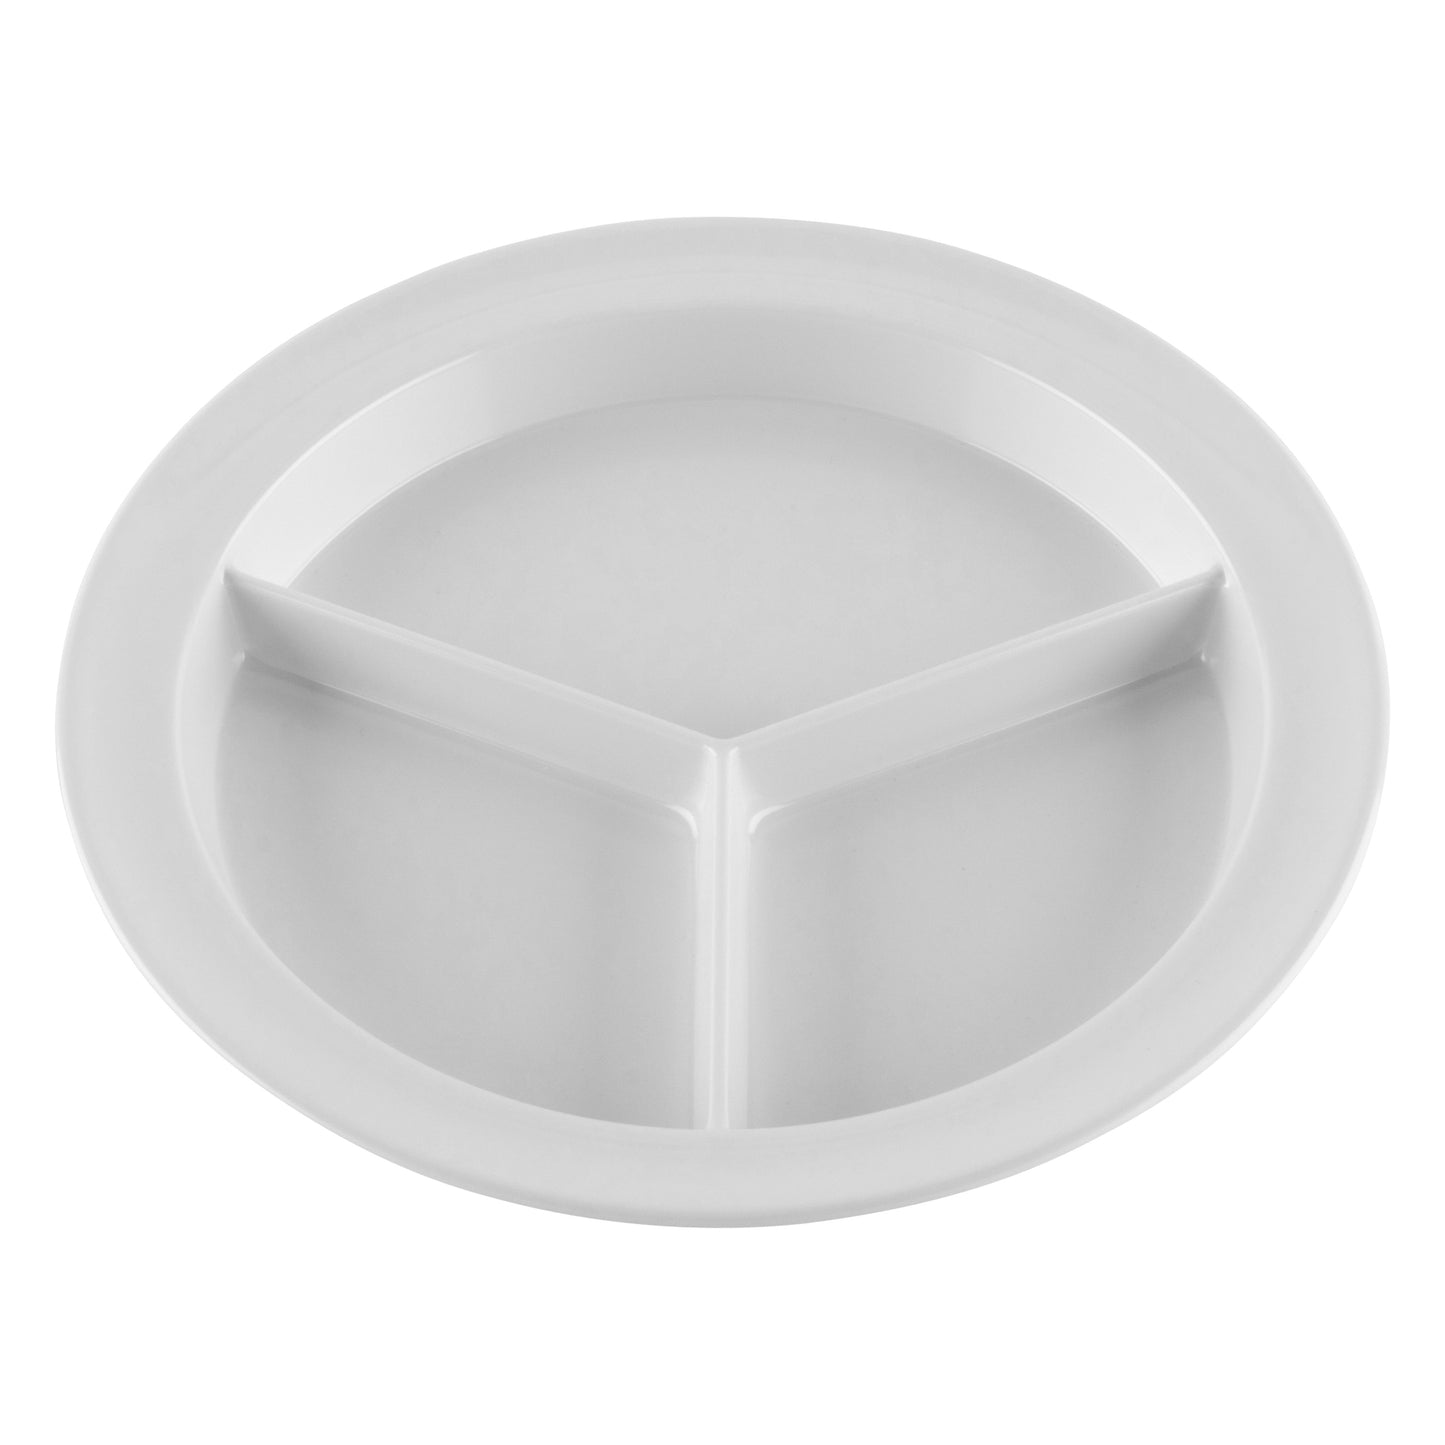 9" 3-Compartment Plate, .75" Deep (12 Pack)